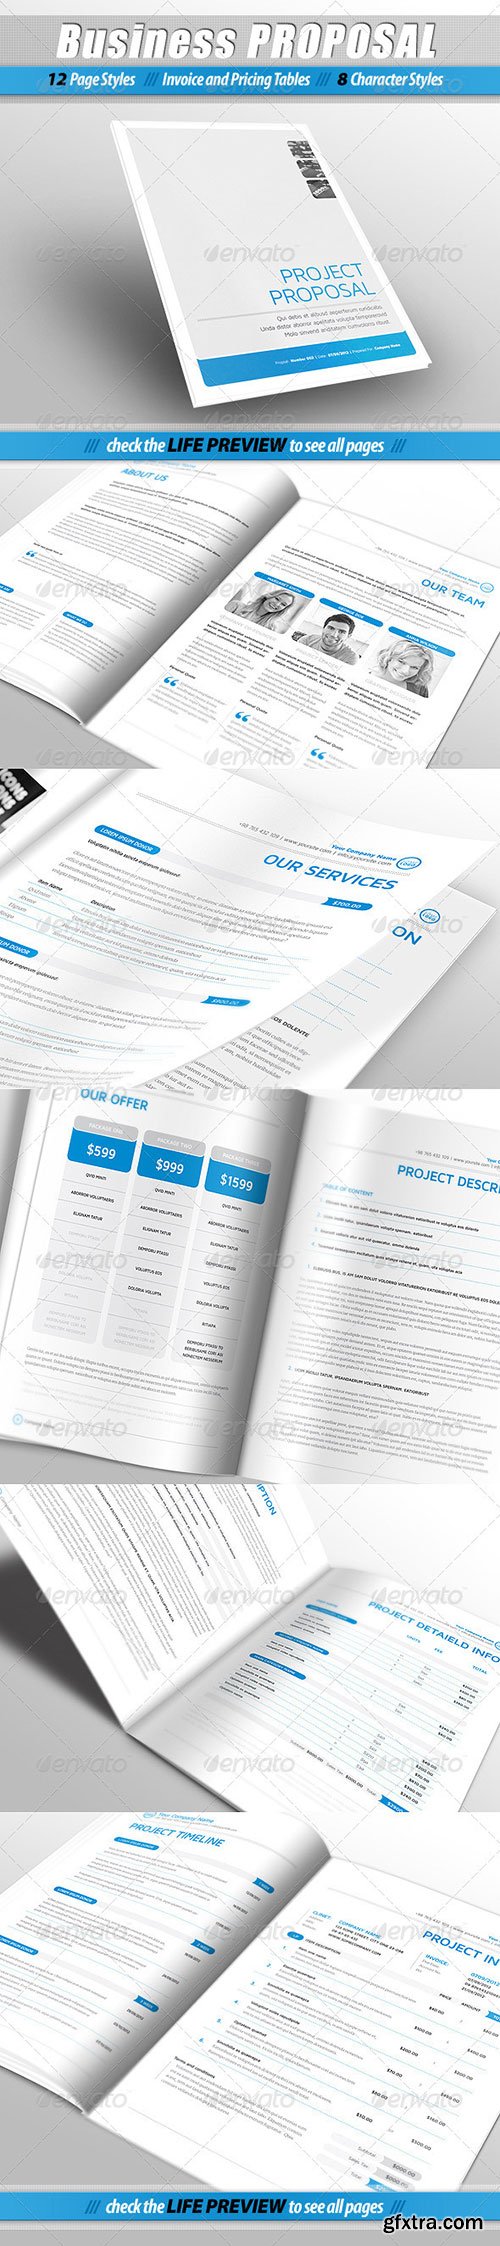 GraphicRiver - Business PROPOSAL 2877243